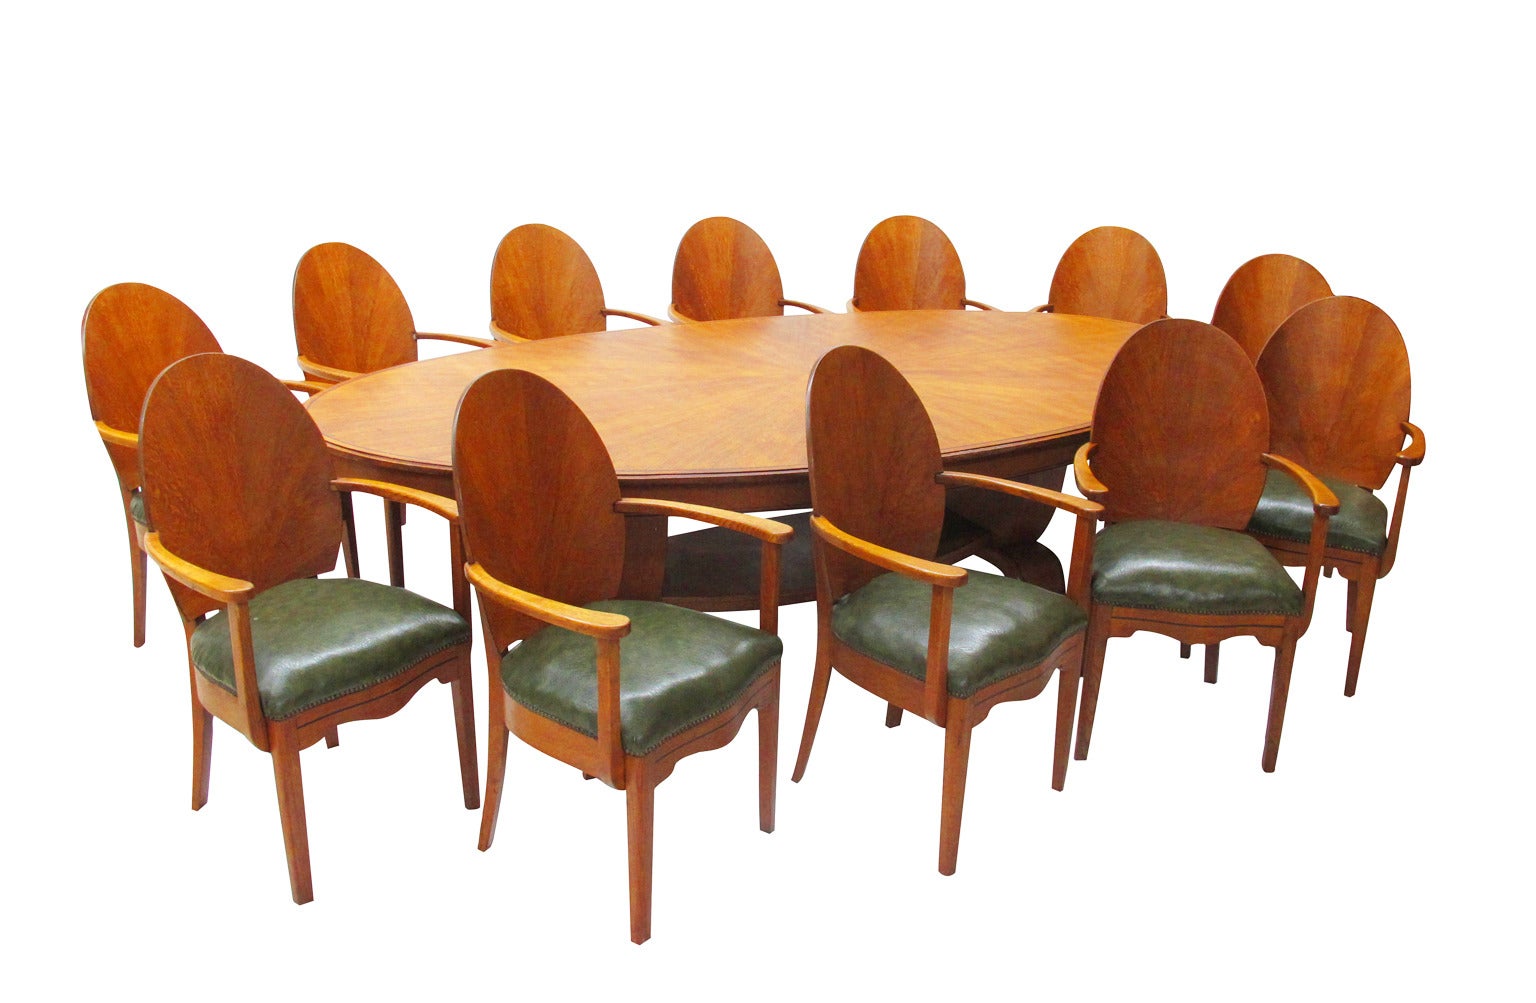 Beautiful Ensemble of Twelve Art Deco Dining Chairs and Dining Table